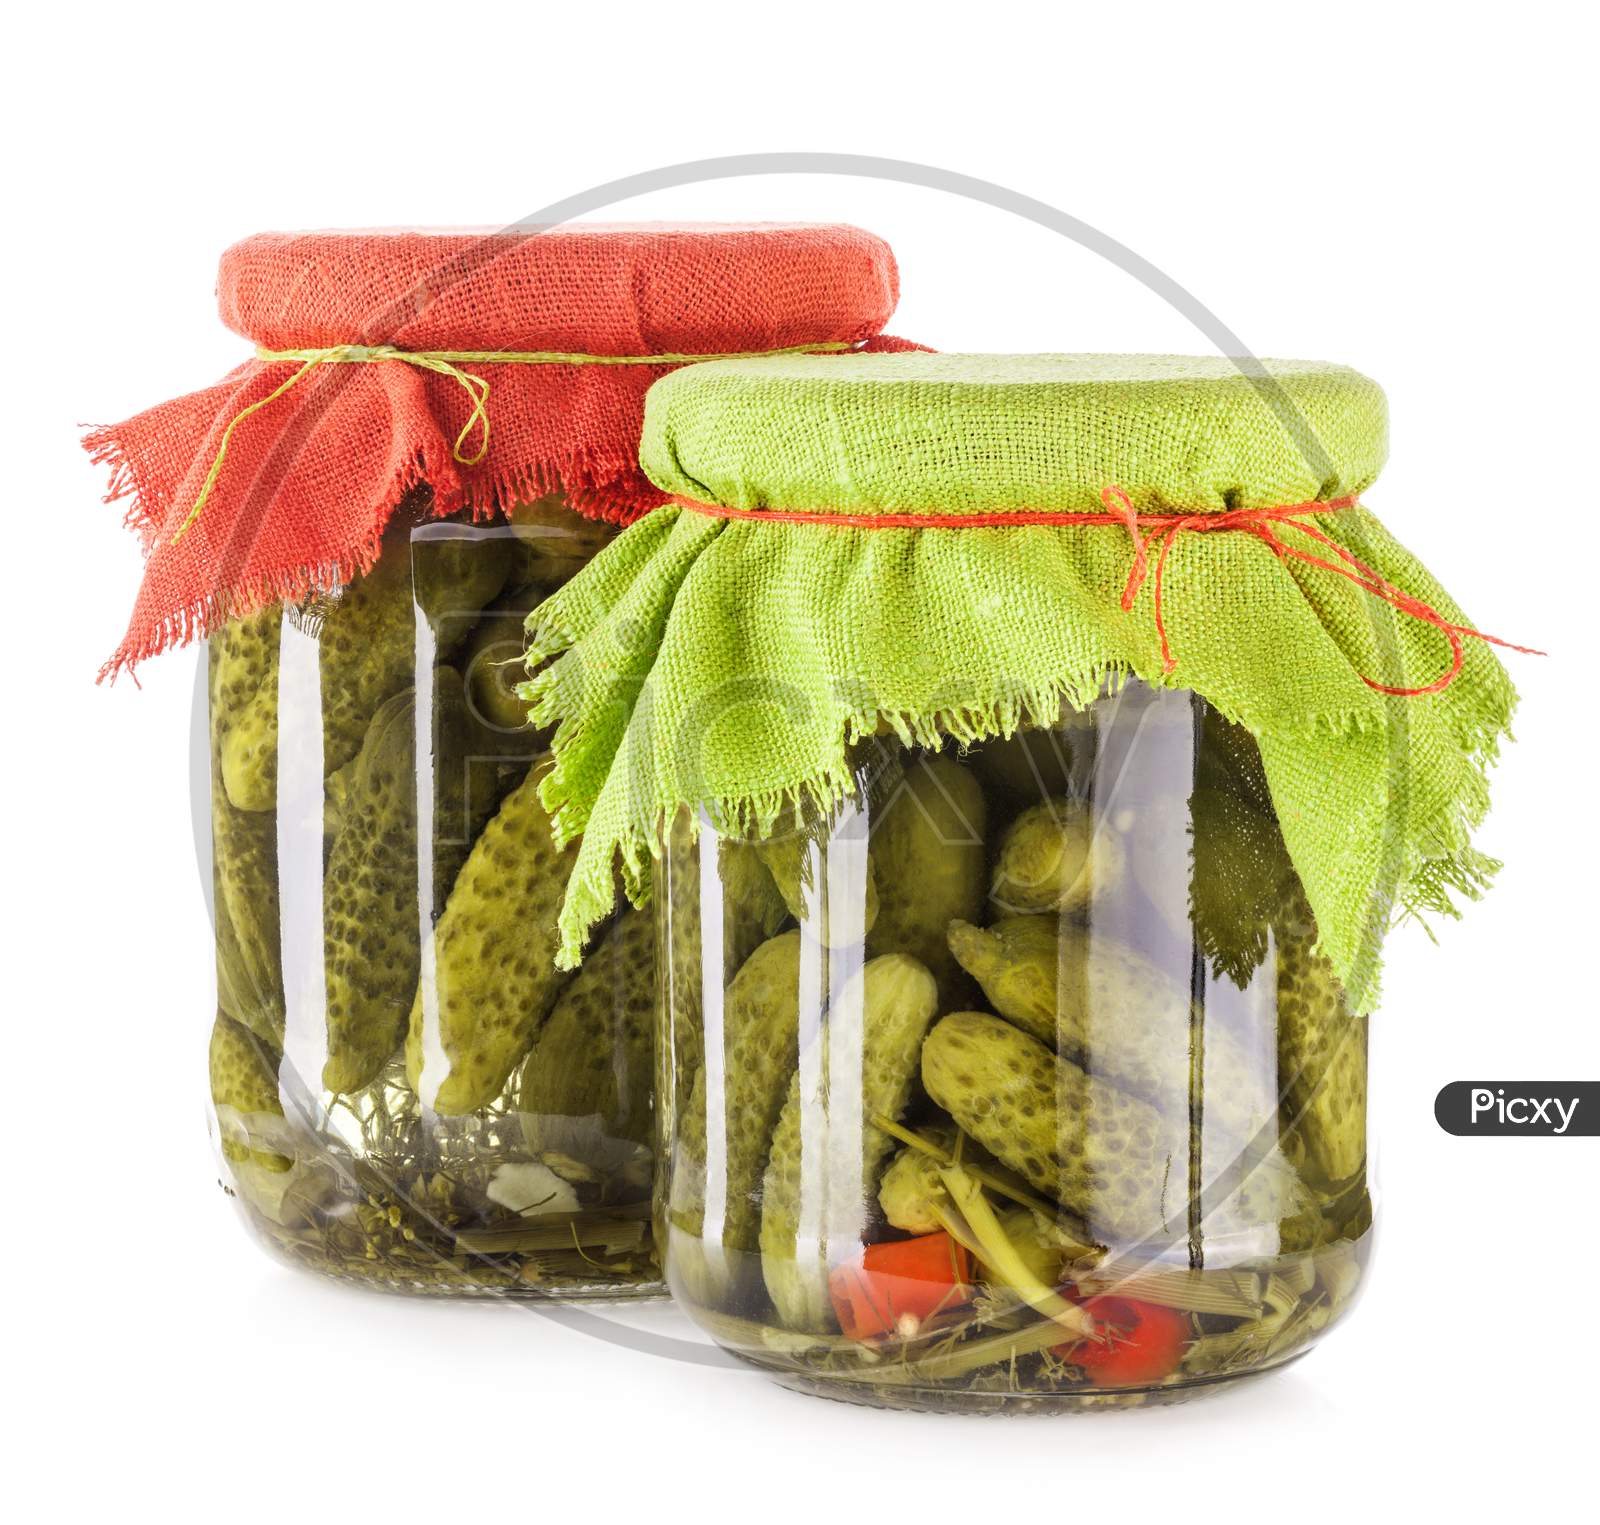 Pickles Cucumbers And Gherkins In Glass Jar Isolated On White